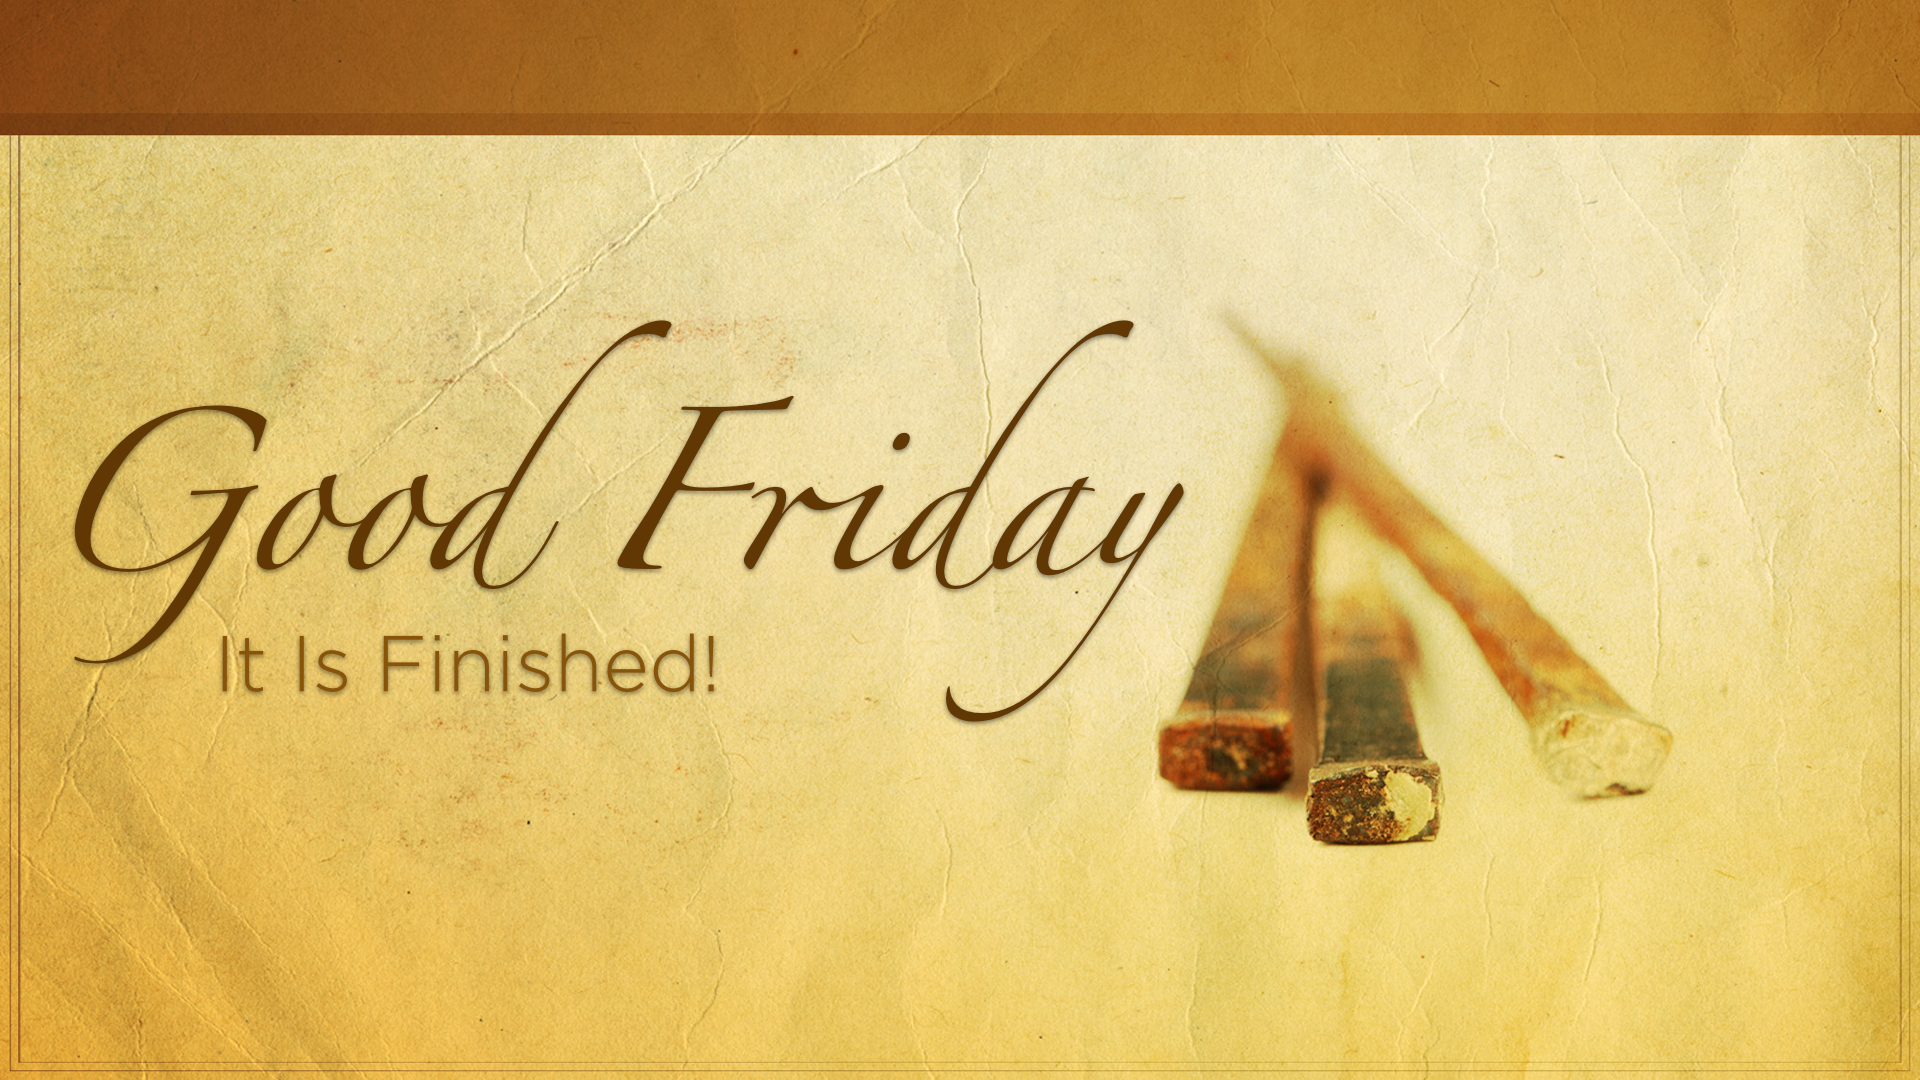 Good Friday Quotes & Wishes Wallpapers - Good Friday is beautiful because  it reminds us that we matter to the great Lord. Have a divine Good Friday!  https://www.inspiringquotes.in/ | Facebook